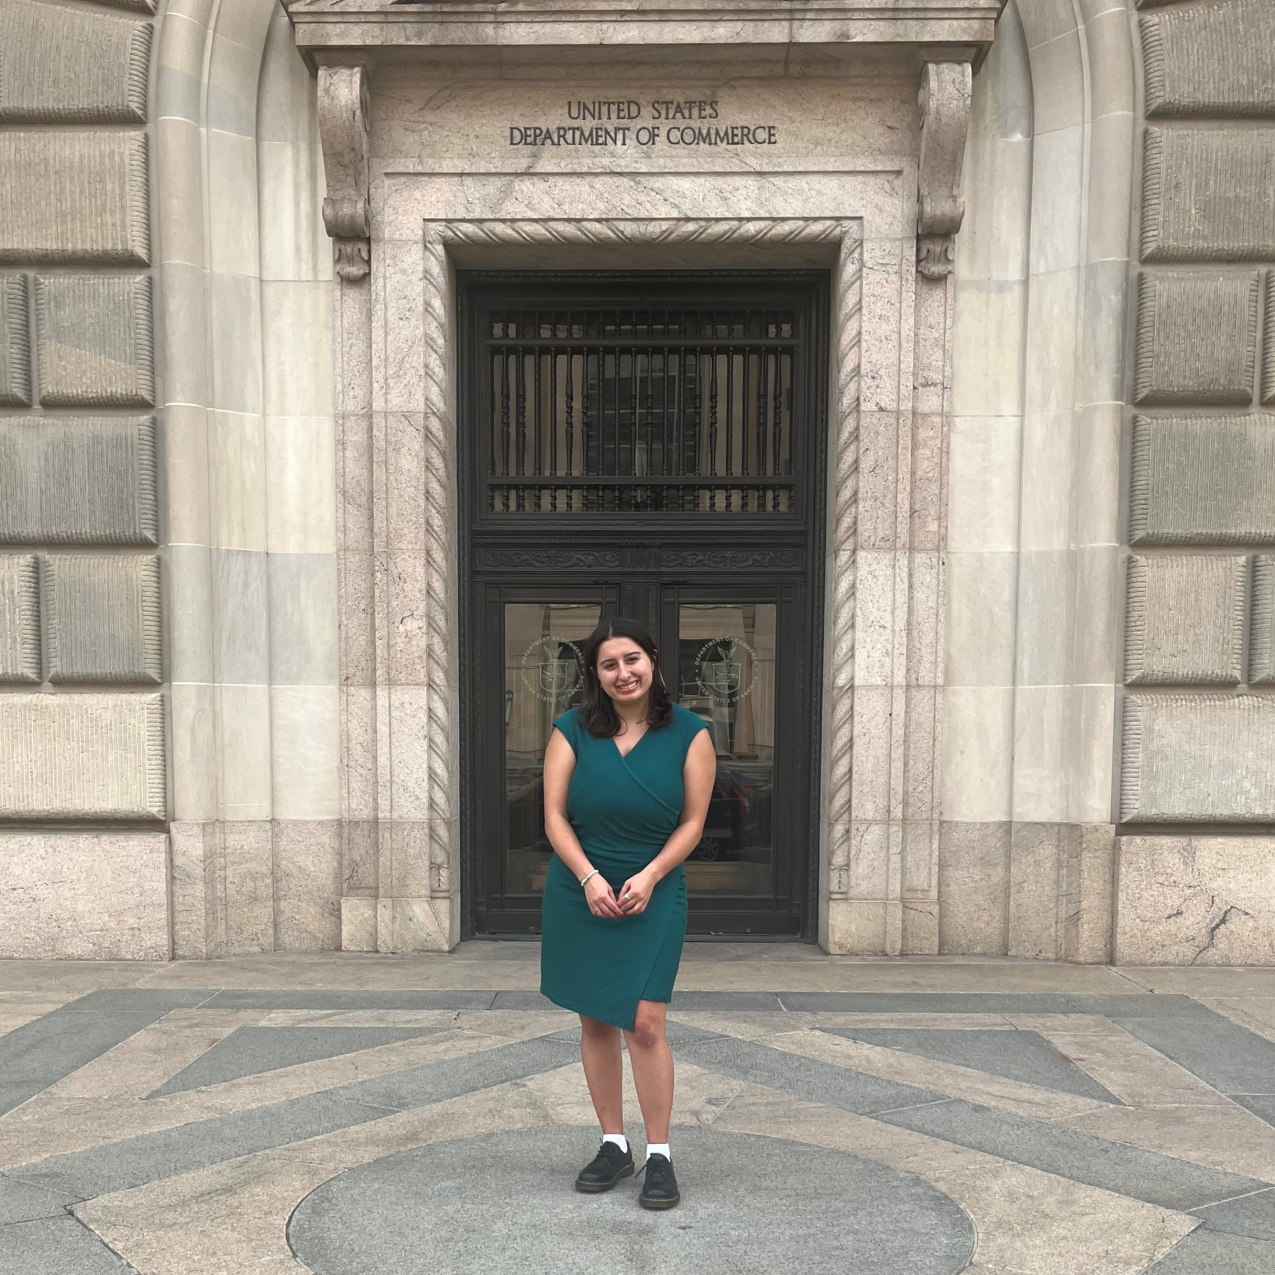 Maria smiles, posing in front of a concrete building with block lettering above the door that reads United States Department of Commerce.